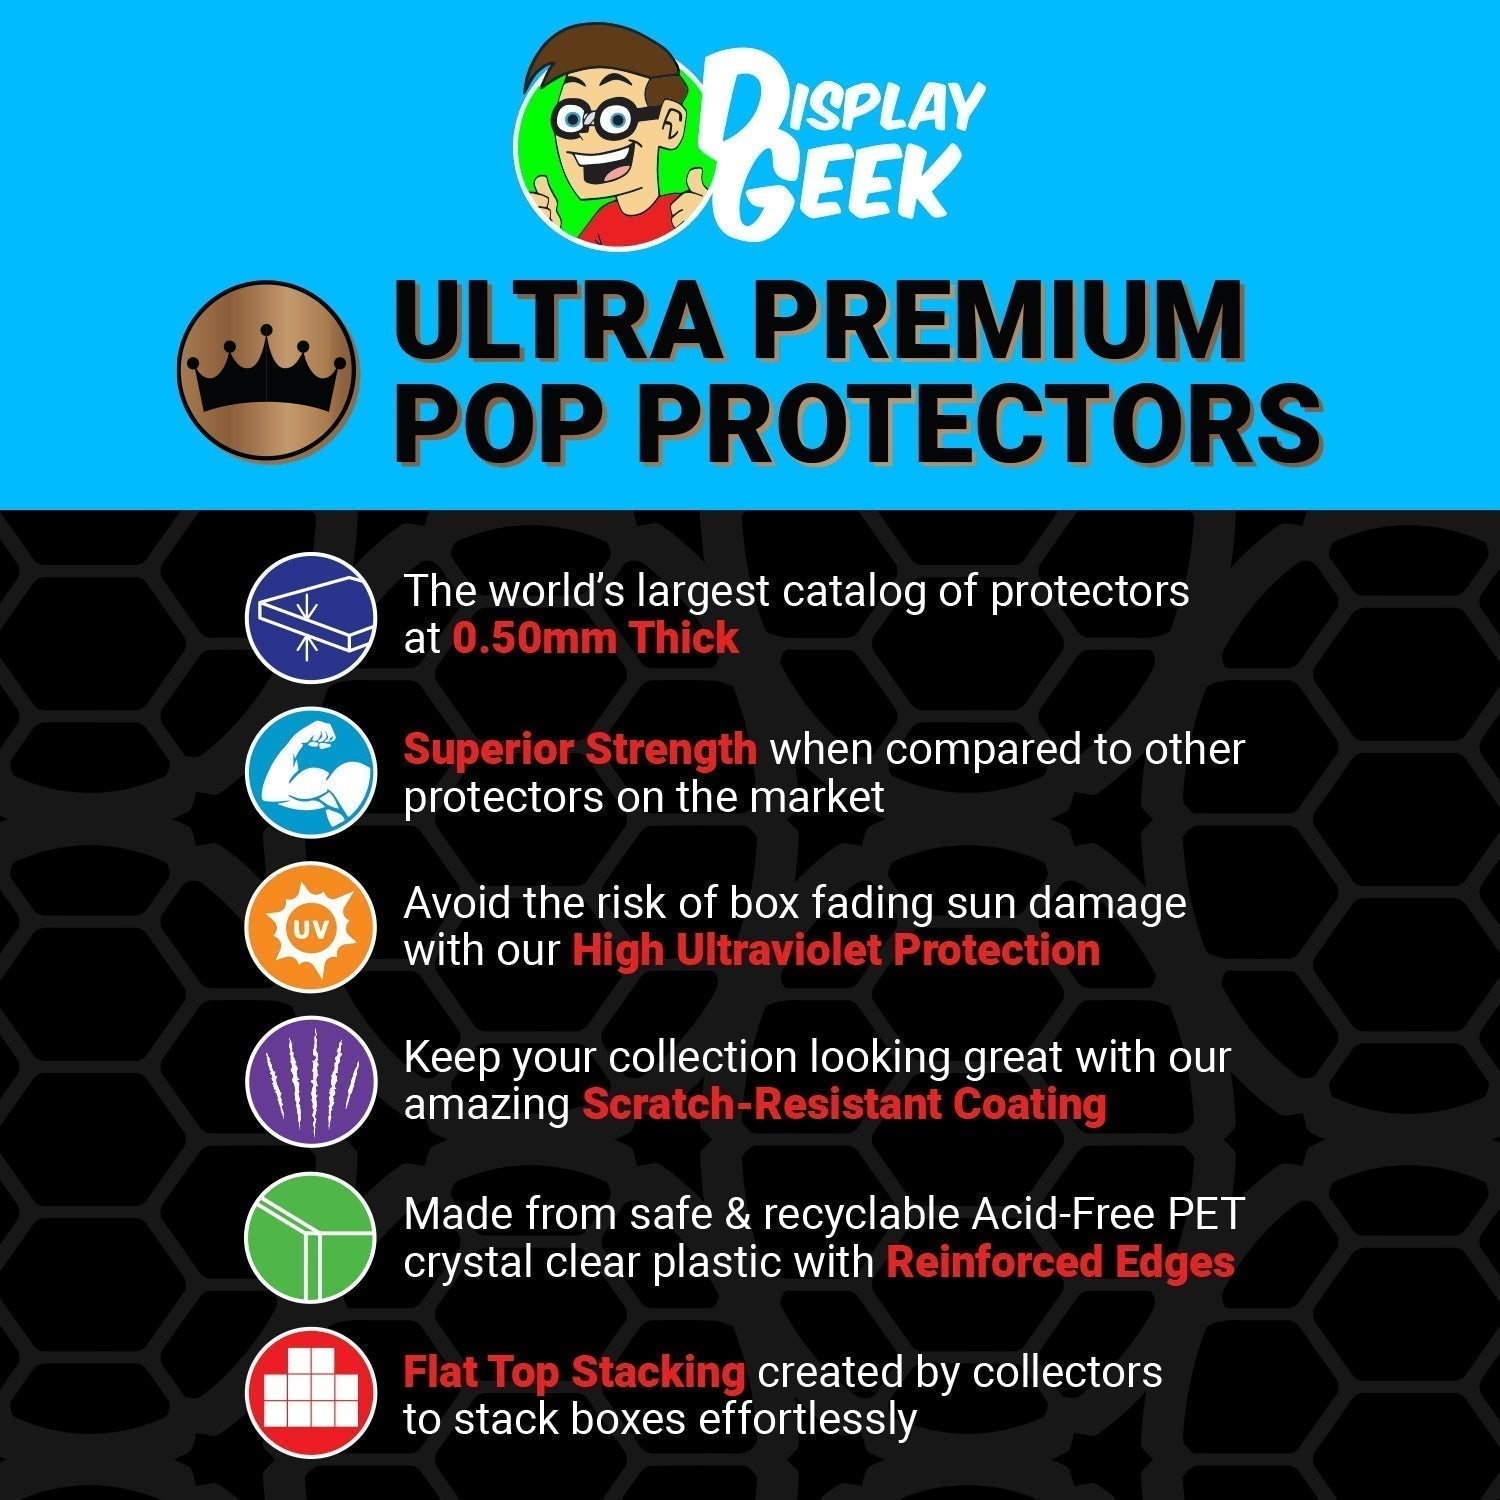 Pop Protector for Skeletor D-Con FunkO's Cereal Box - PPG Pop Protector Guide Search Created by Display Geek